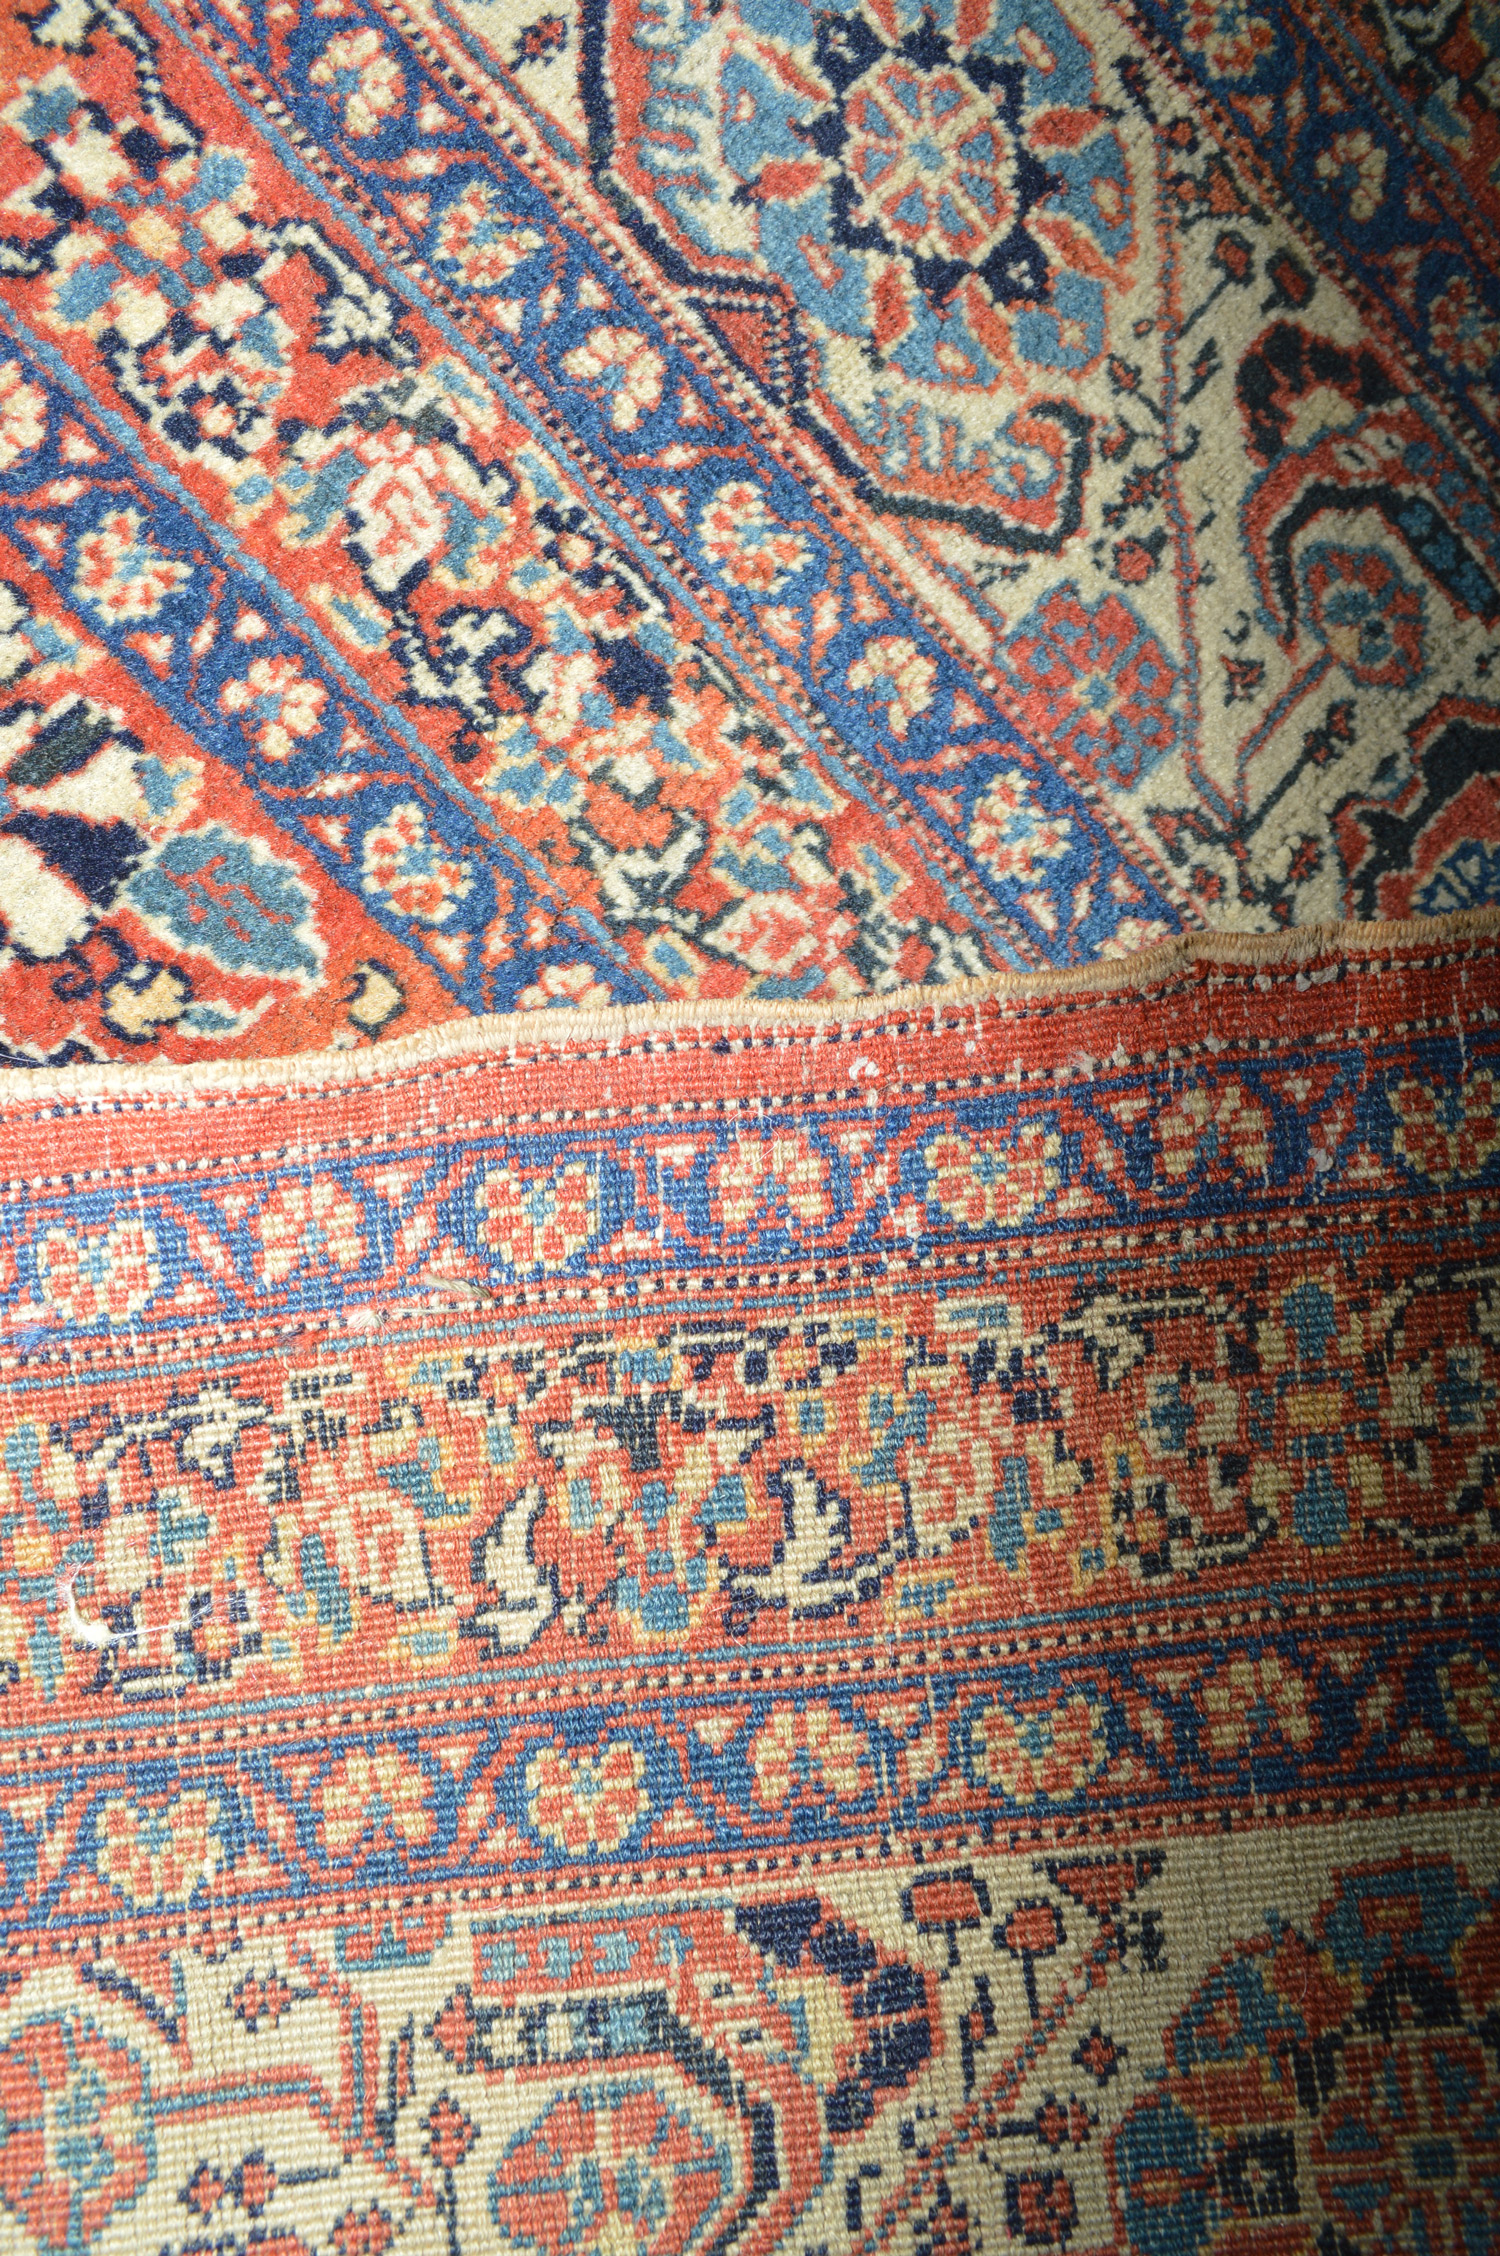 Weave detail of an antique Persian Tabriz rug with an ivory field and complex border system, circa 1915 - Douglas stock Gallery, antique Persian rugs Boston,MA area New England, antique rugs New York, antique rugs Washington DC